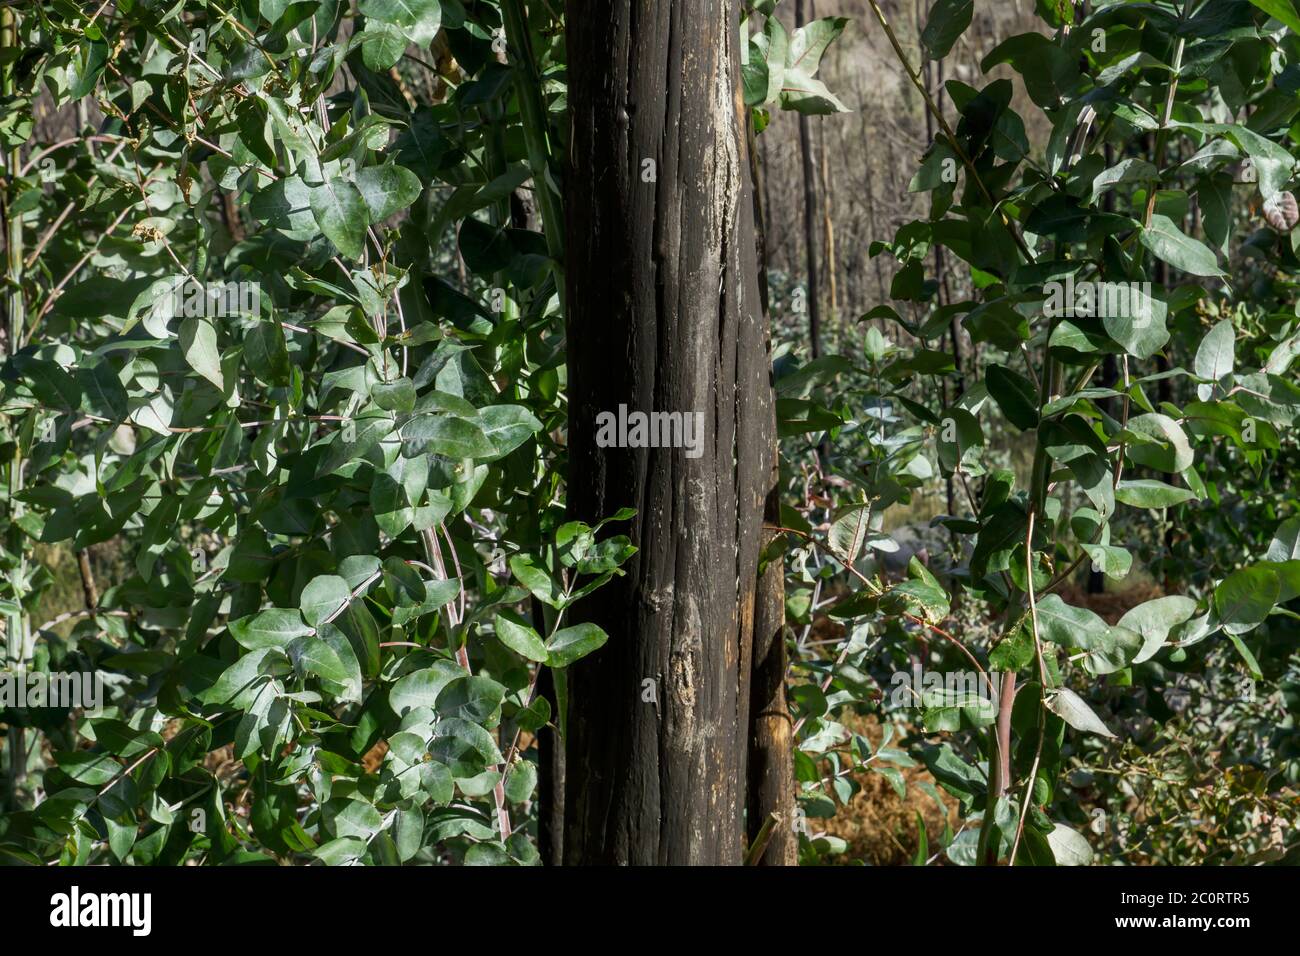 Eucalyptus with green foliage and black burned bark, pyrophyte trees sprouting after a wildfire Stock Photo